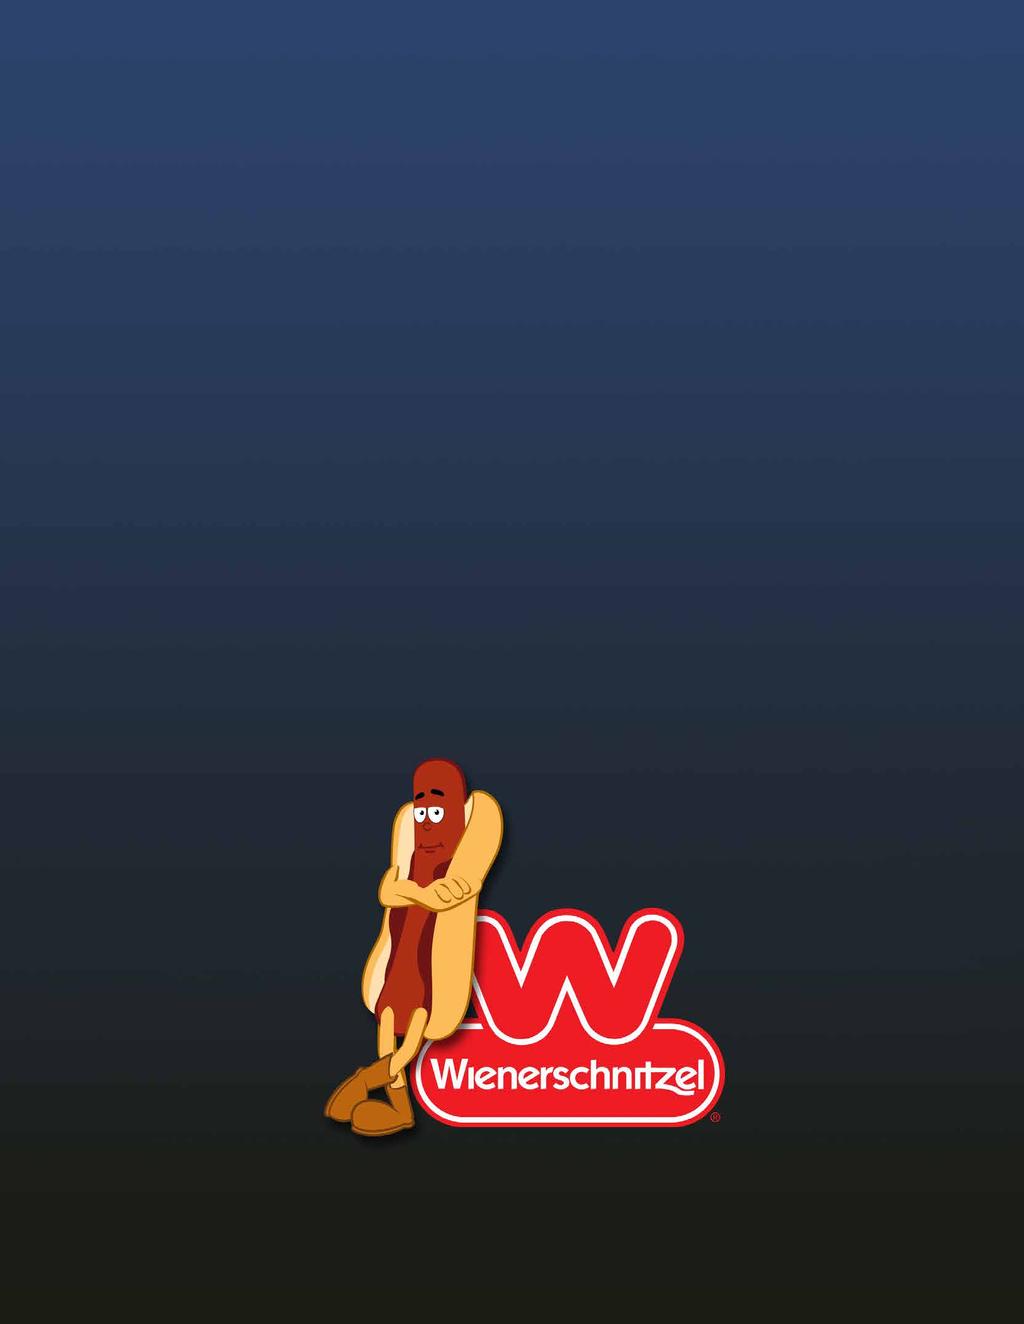 After 40 years in the industry, I can honestly say Wienerschnitzel continues to be a premium